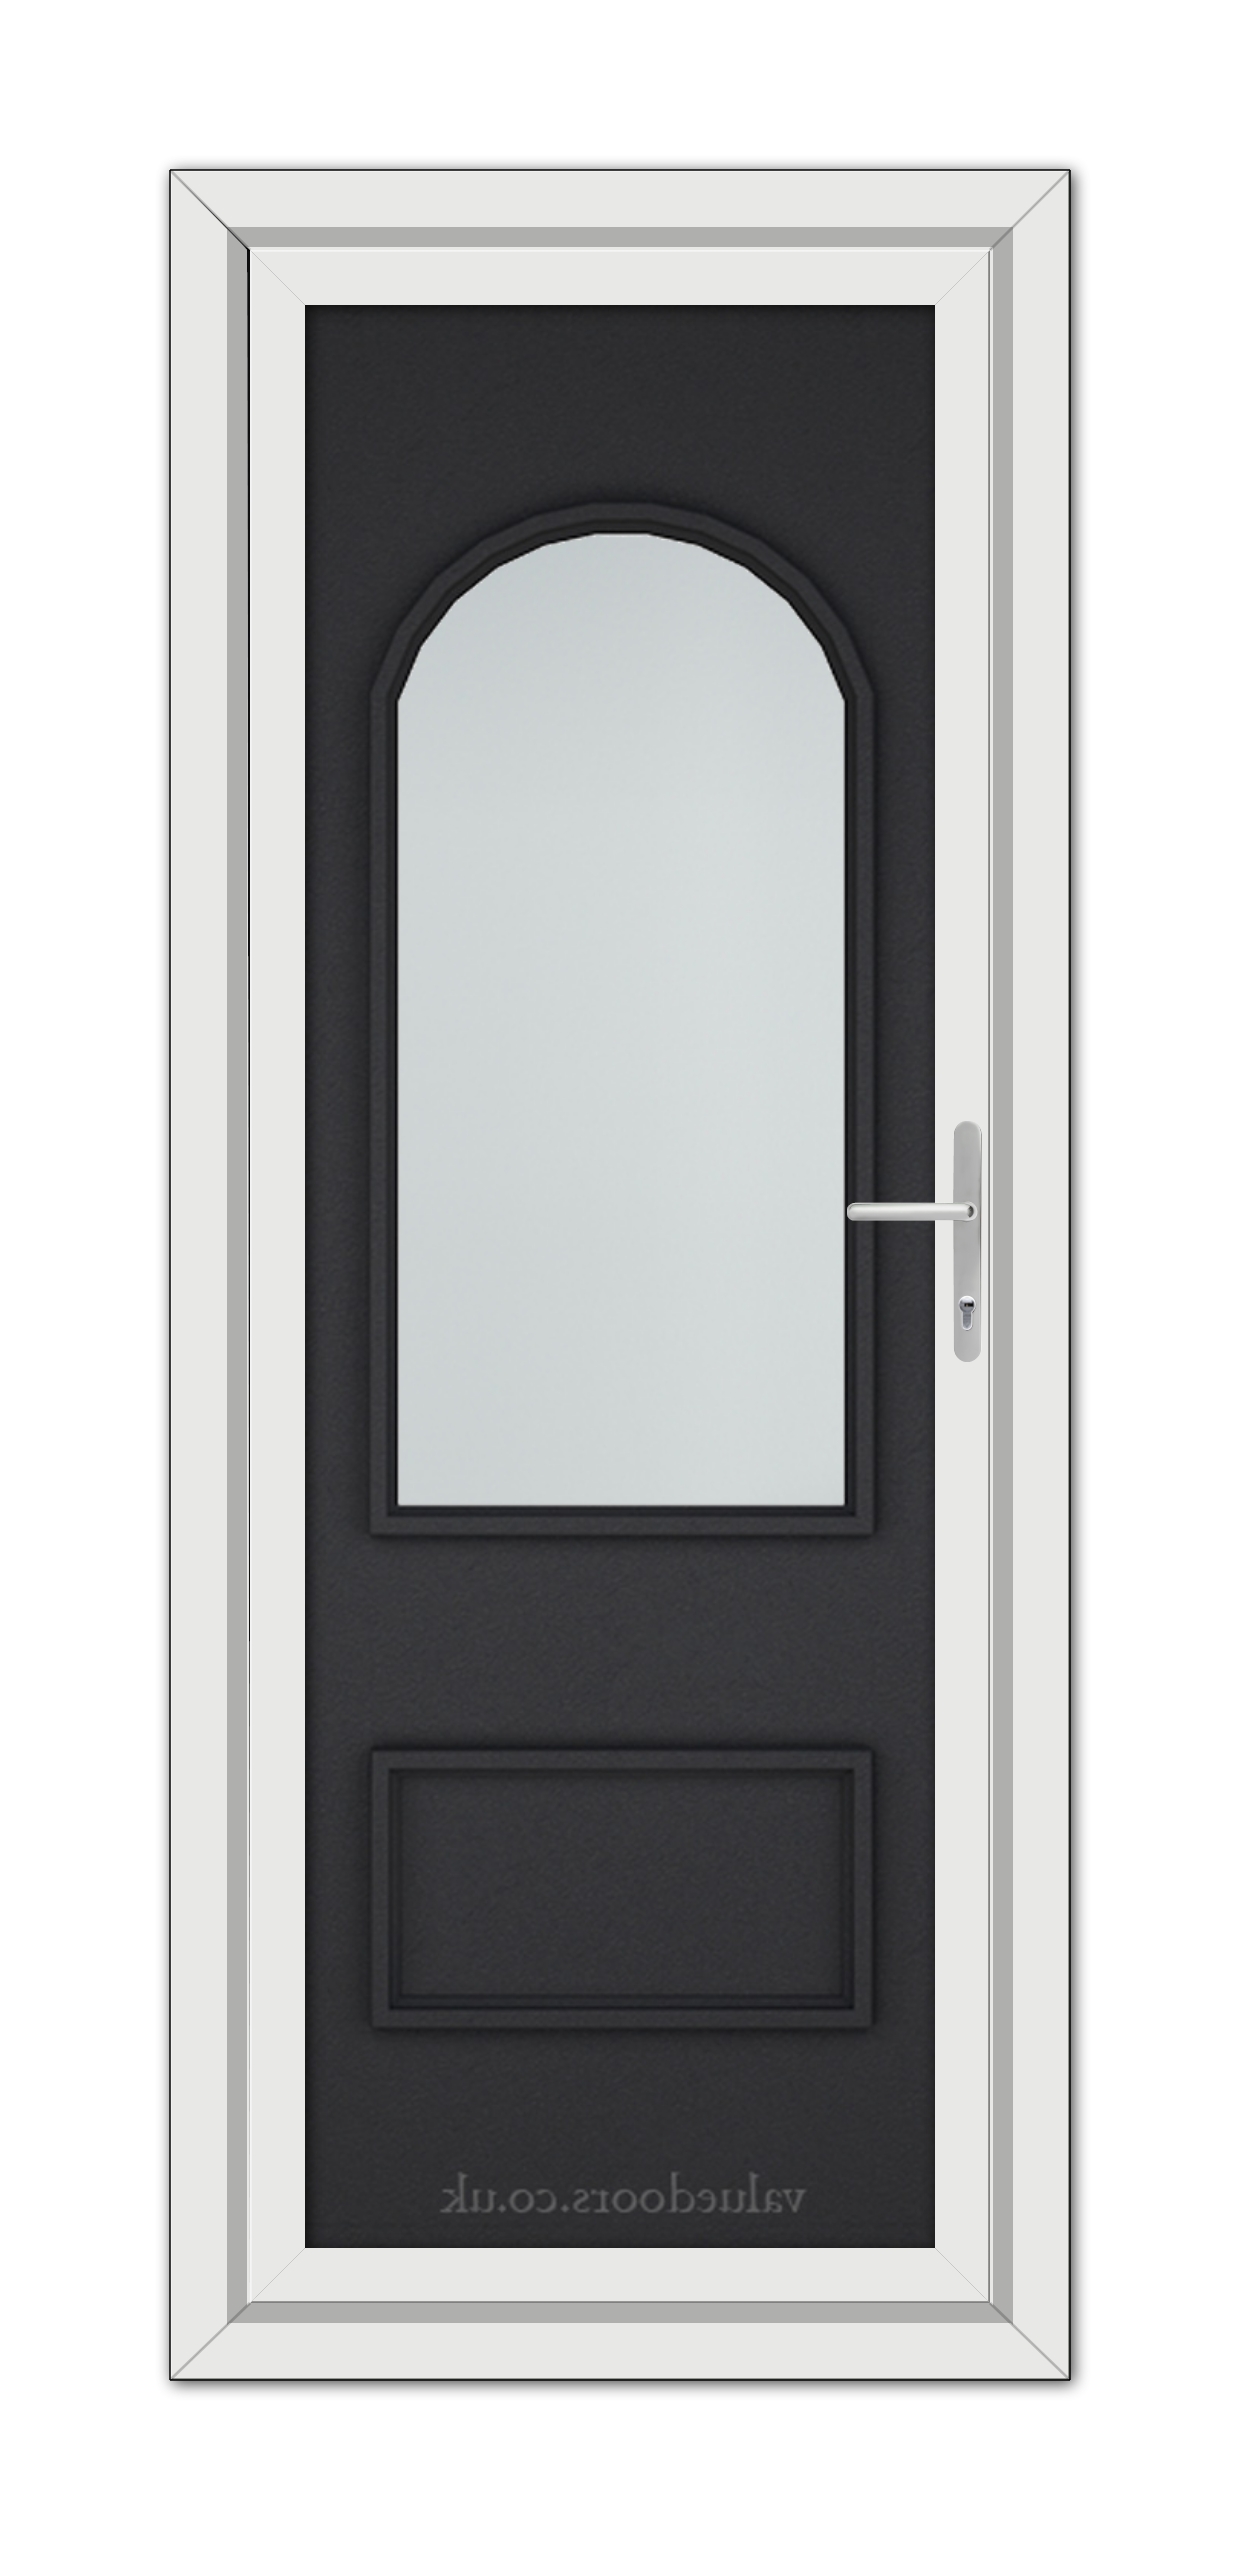 A Black Brown Rockingham uPVC door with a oval glass window near the top and a metallic handle, framed in white.